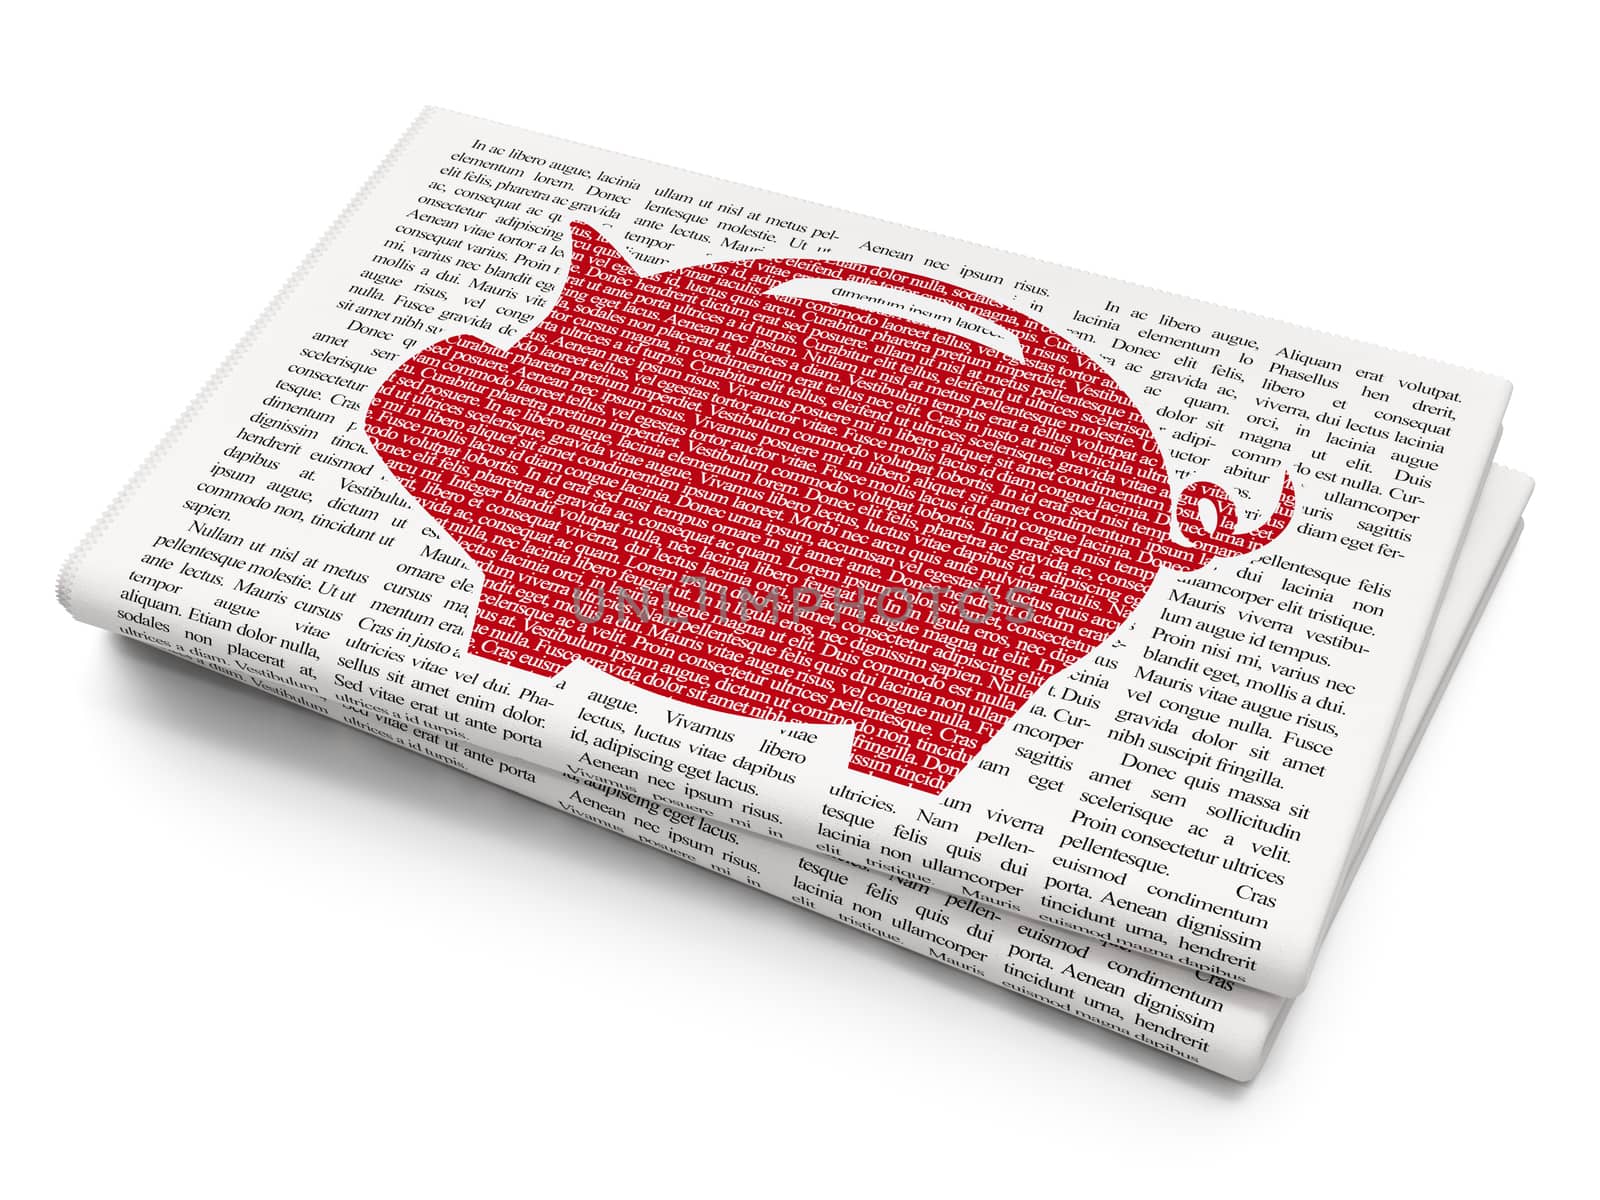 Money concept: Pixelated red Money Box icon on Newspaper background, 3D rendering